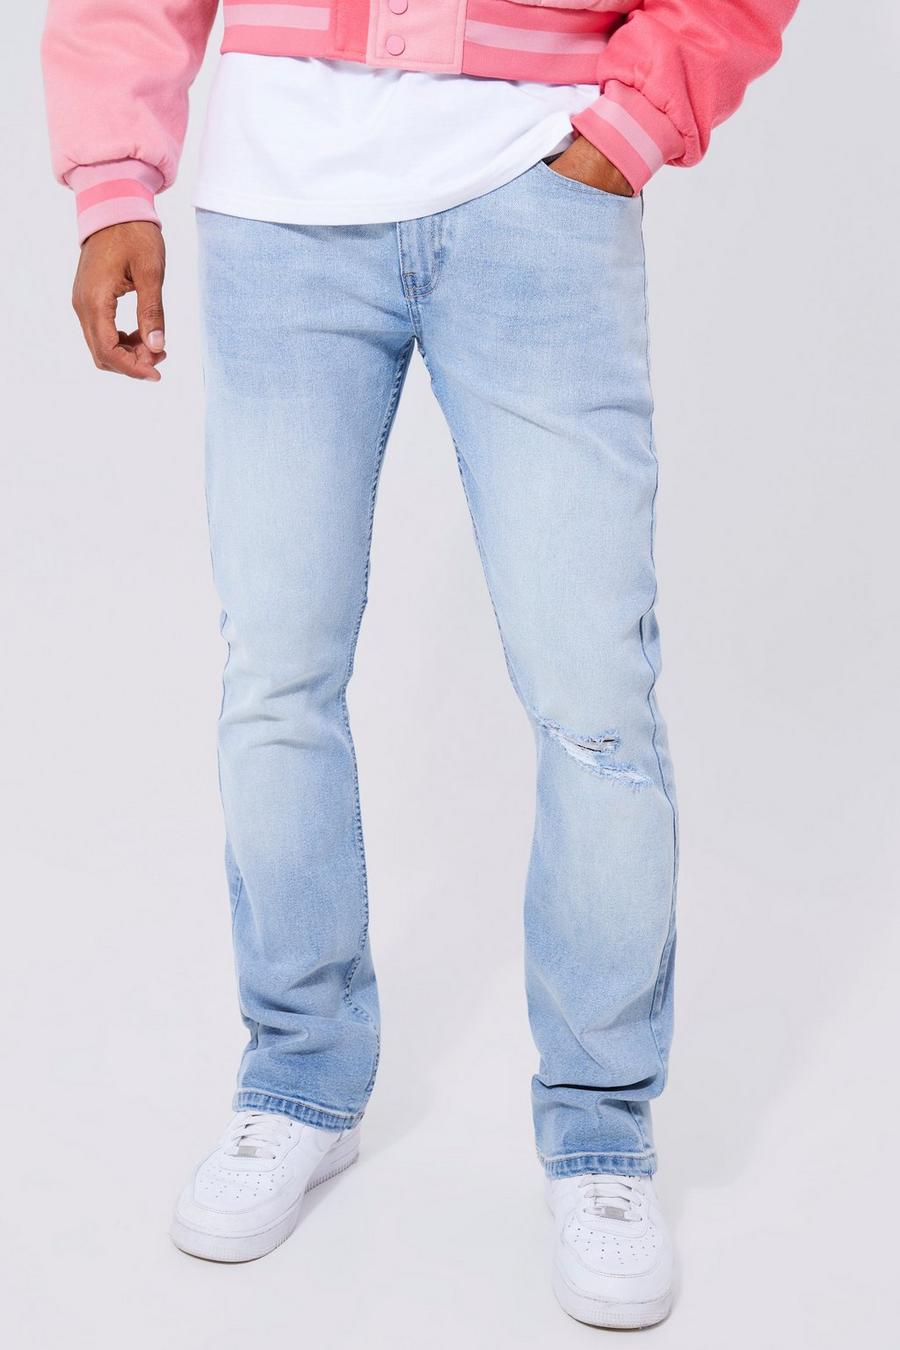 Boohoo Man Super Skinny Button Fly Jeans Mens Size 34 New - beyond